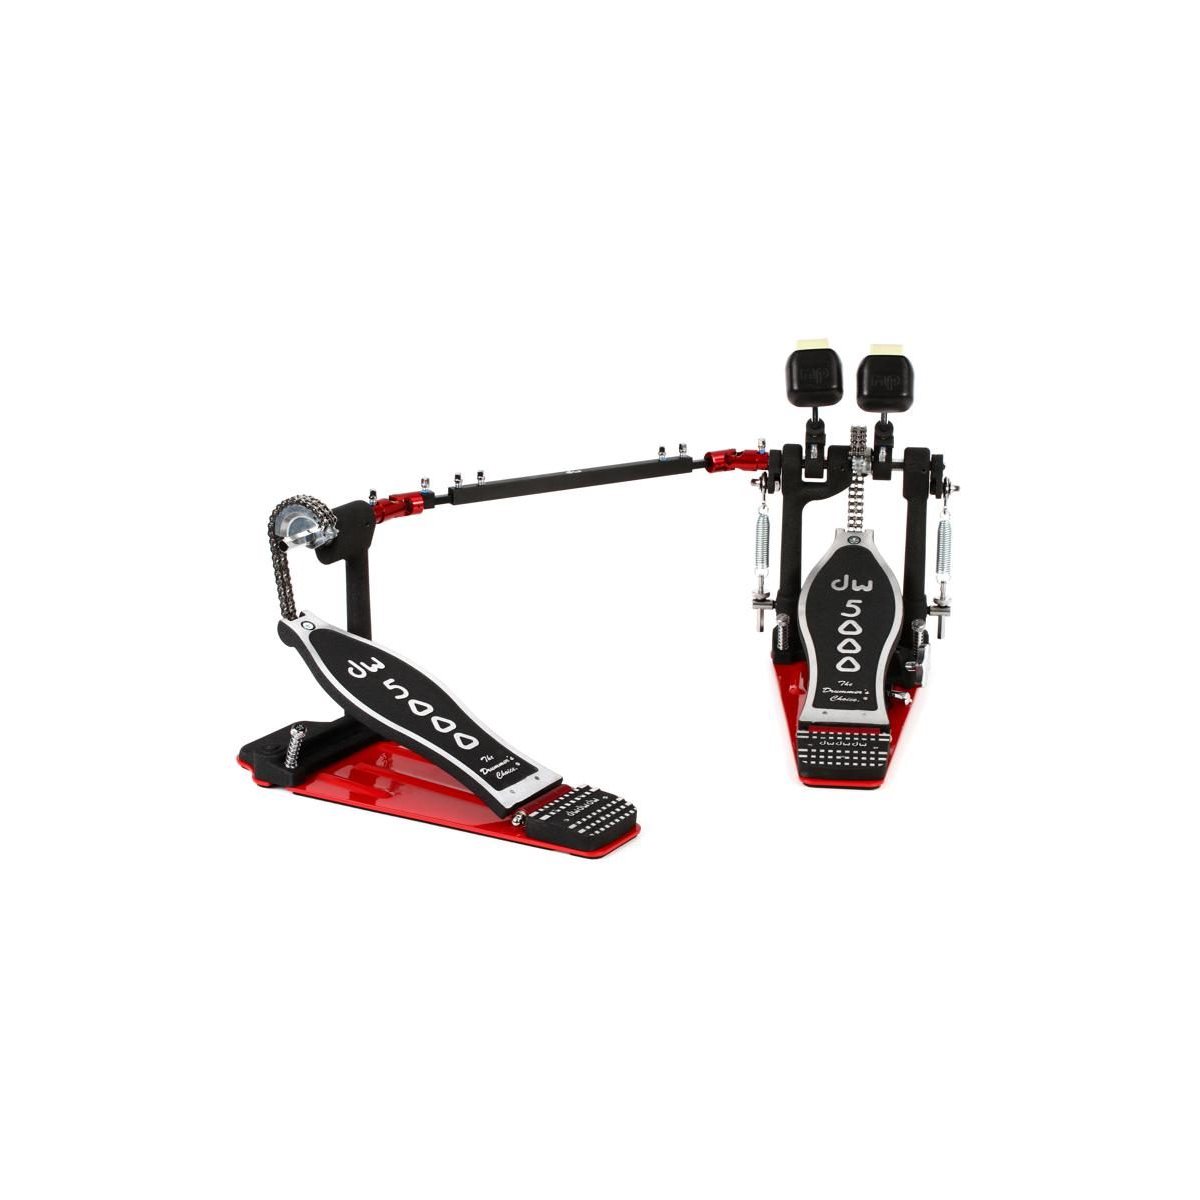 DW - DWCP5002AD4 - 5000 Series Accelerator Double Bass Drum Pedal